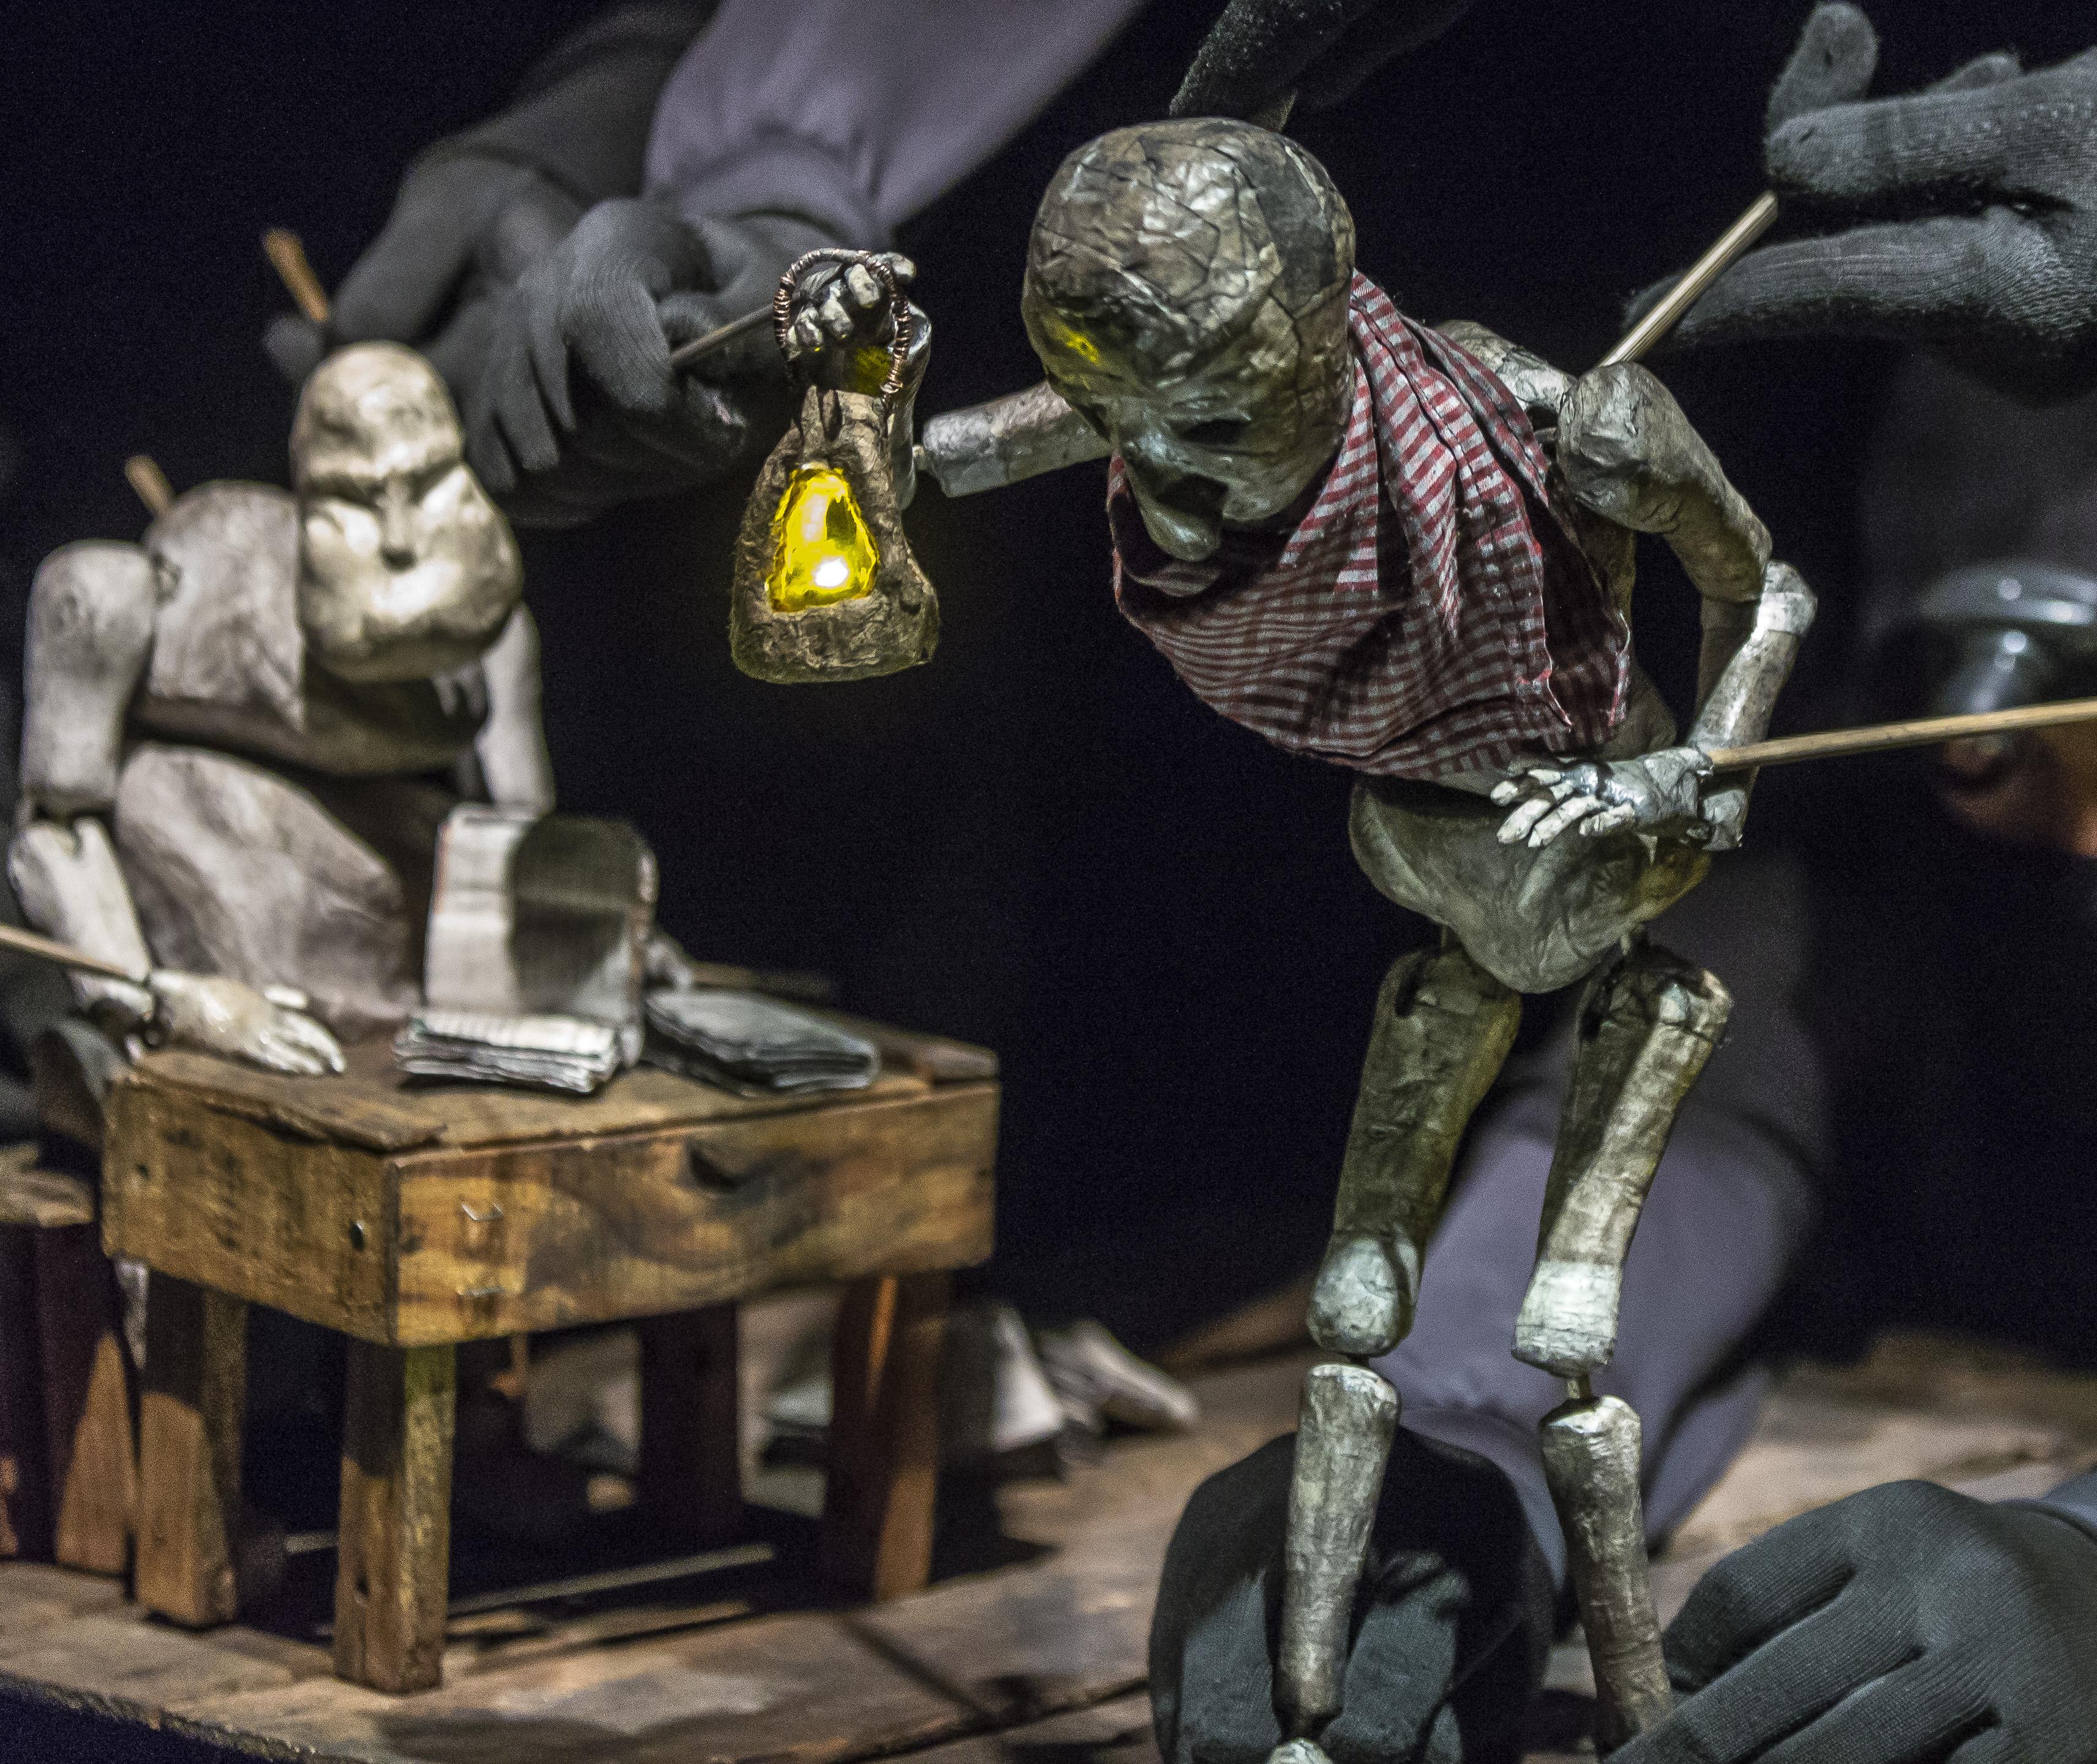 A small coal smudged, paper puppet holds a lantern, while another puppet sits at a table with a book. The gloved hands of the puppeteers manipulate the puppet with thin sticks.